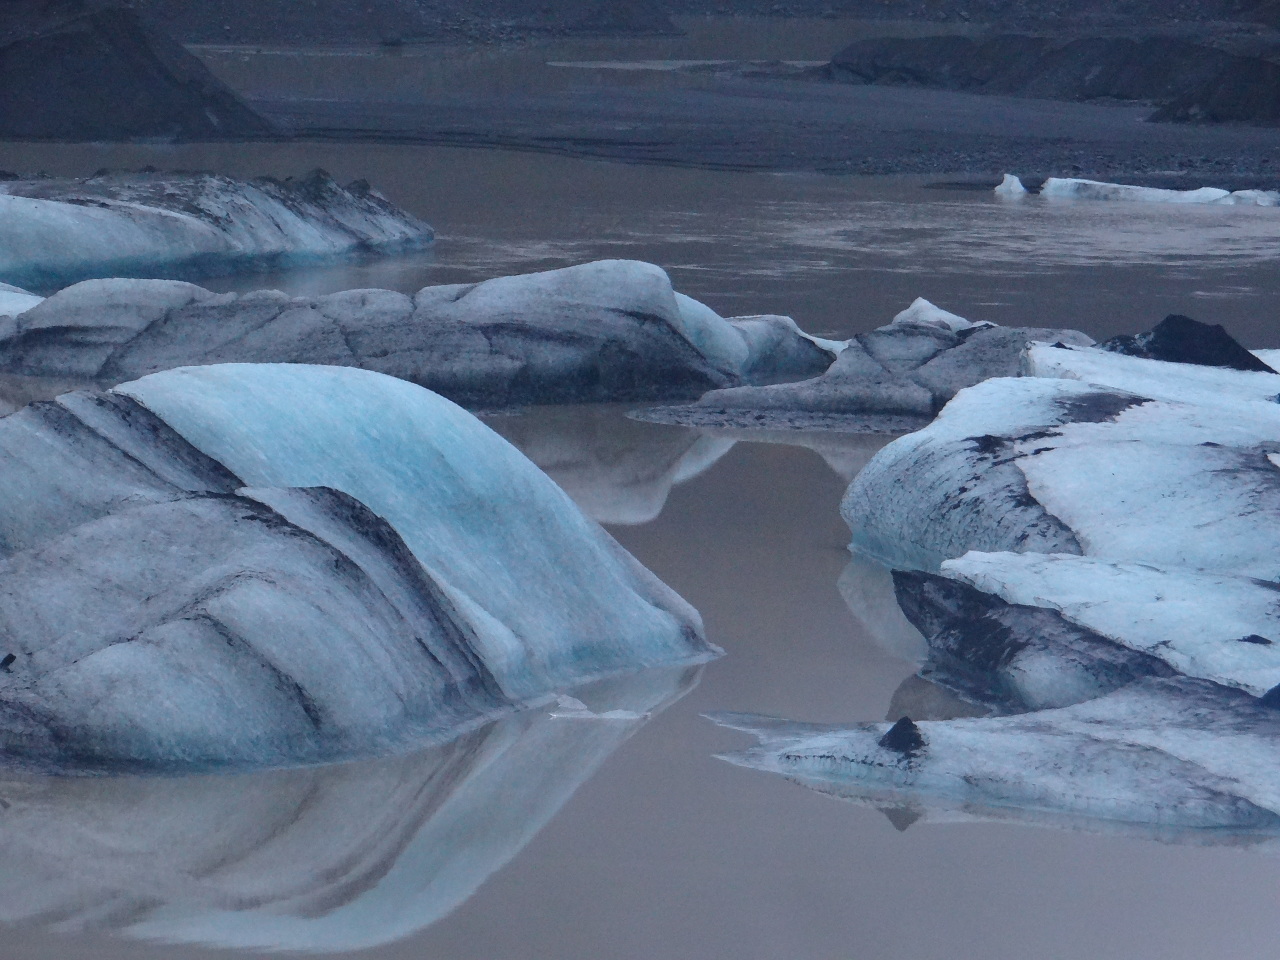 Floating glaciers in lake in Iceland